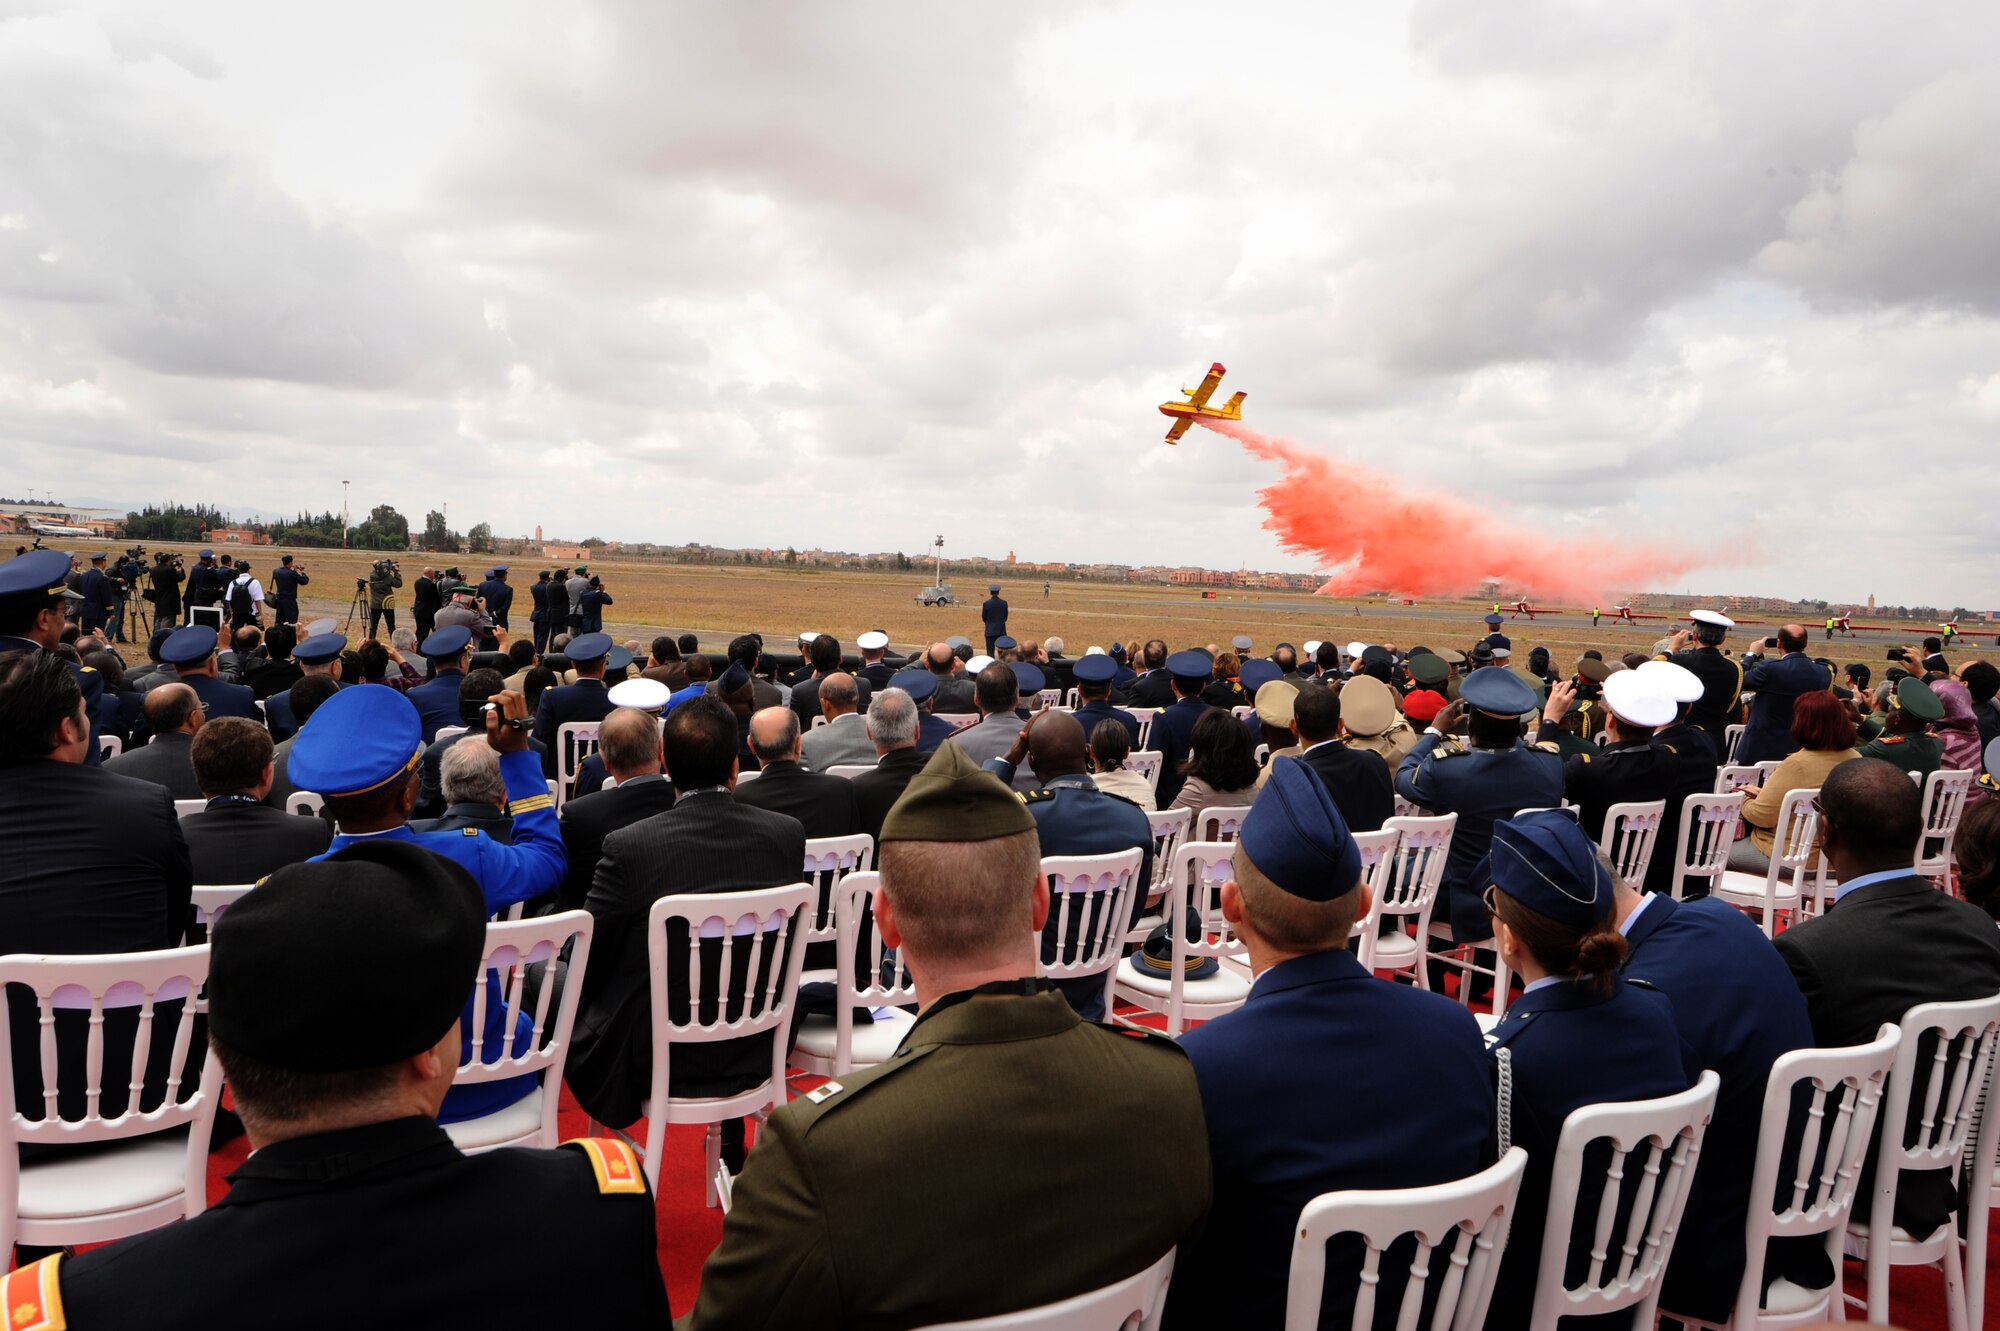 MARRAKECH, Morocco – A Royal Moroccan Air Force CL-415 performs for a crowd during the opening ceremonies at the Marrakech Aeroexpo April 4, 2012. U.S. Air Forces Africa is participating the third biennial Aeroexpo Marrakech to strengthen the partnerships with the nations involved and show commitment to security and stability in the region. (U.S. Air Force photo/Staff Sgt. Benjamin Wilson)